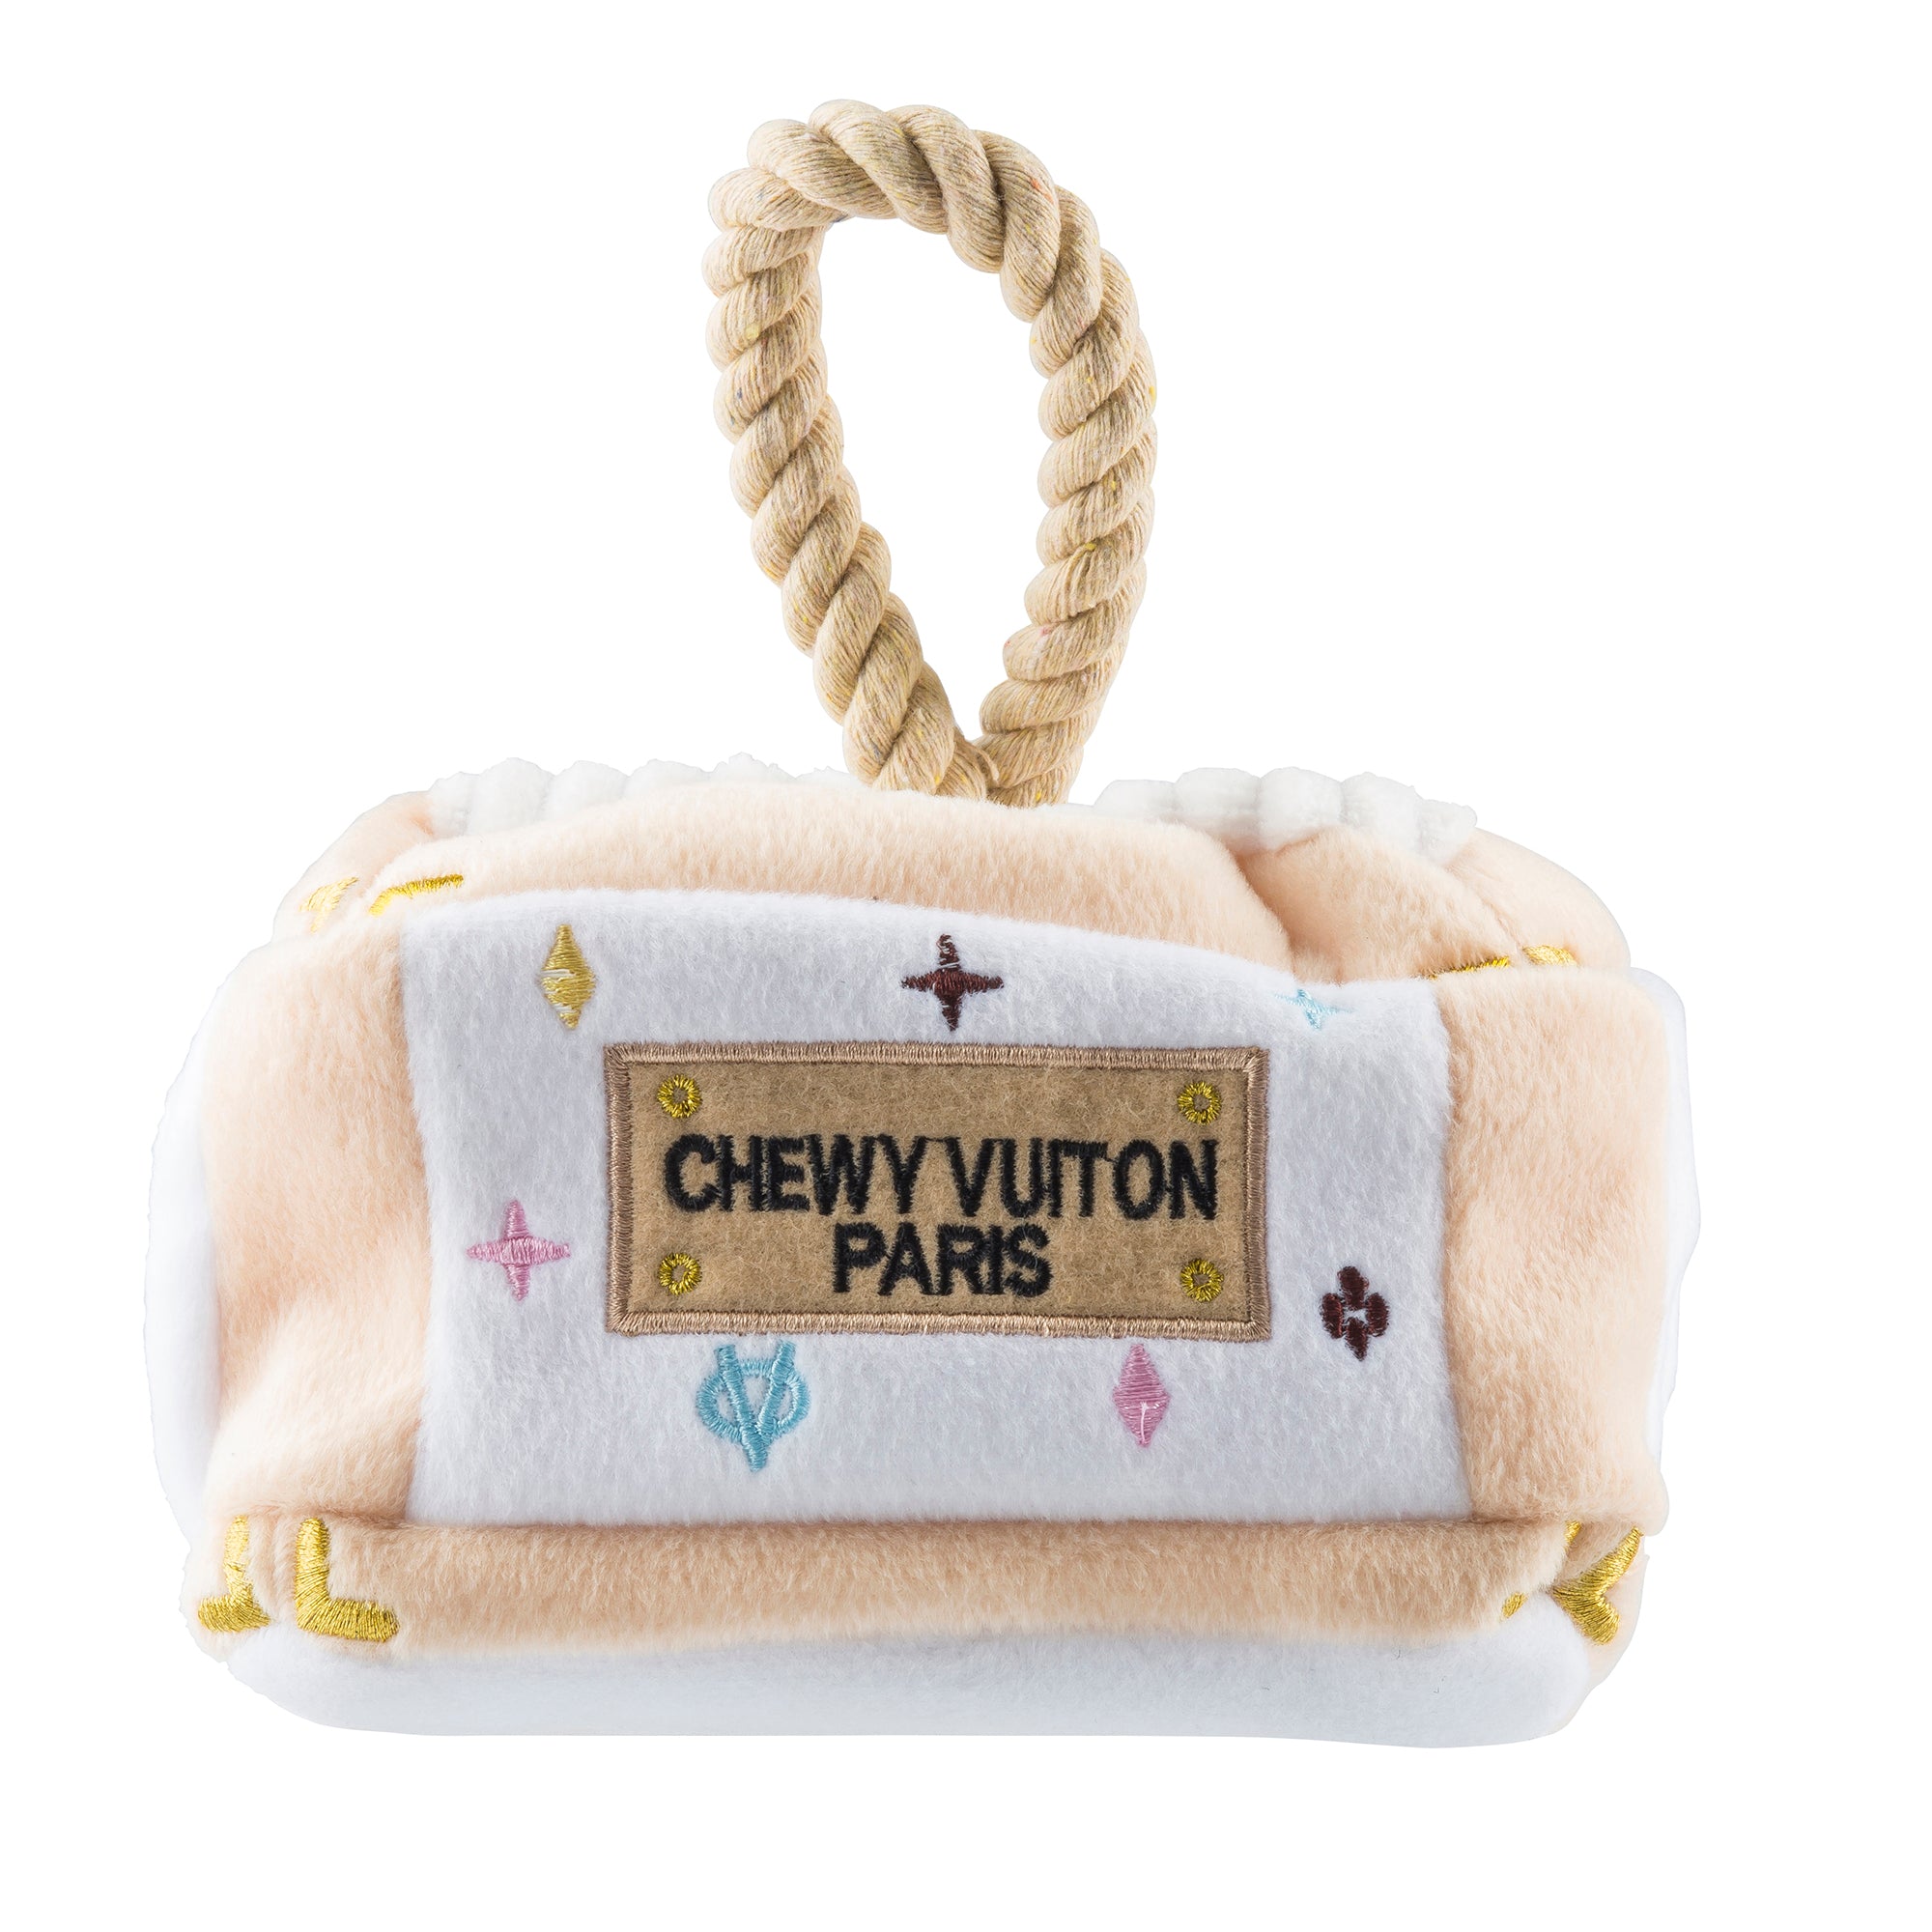 Pet Supplies : Haute Diggity Dog Chewy Vuiton Checker Collection – Soft  Plush Designer Dog Toys with Squeaker and Fun, Unique, Parody Designs from  Safe, Machine-Washable Materials for All Breeds & Sizes 